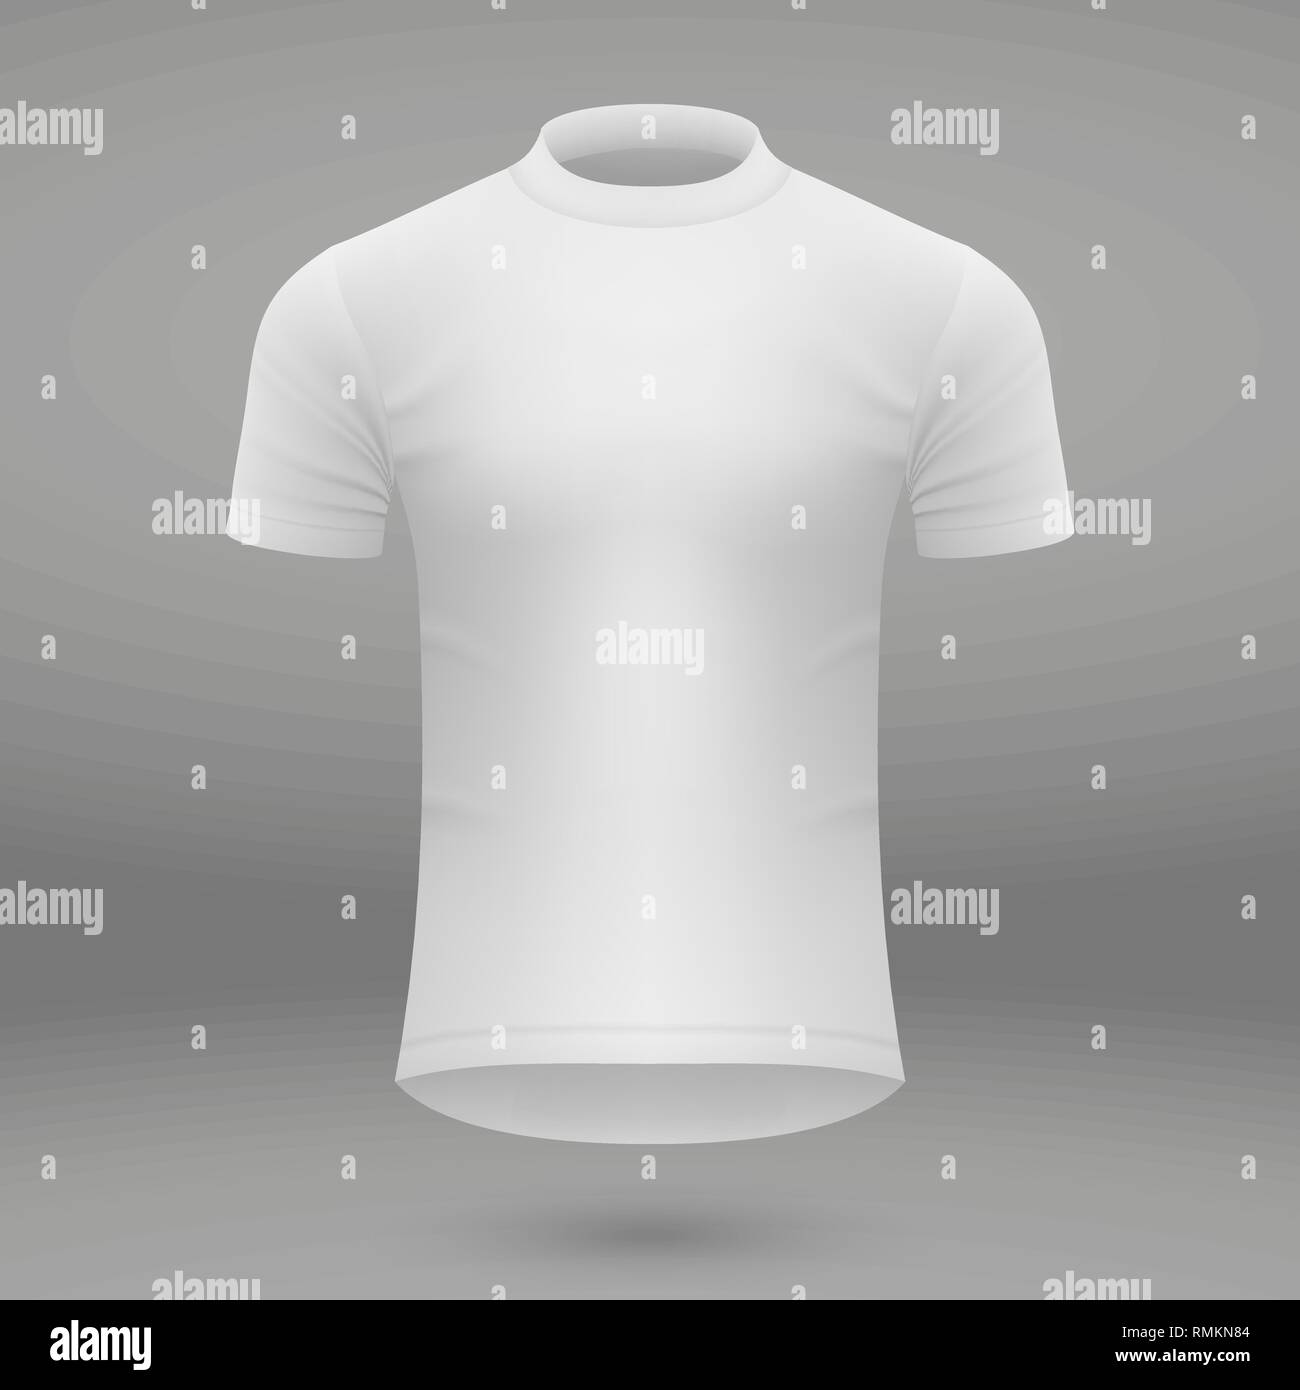 shirt template for cycling jersey. Vector illustration Stock Vector